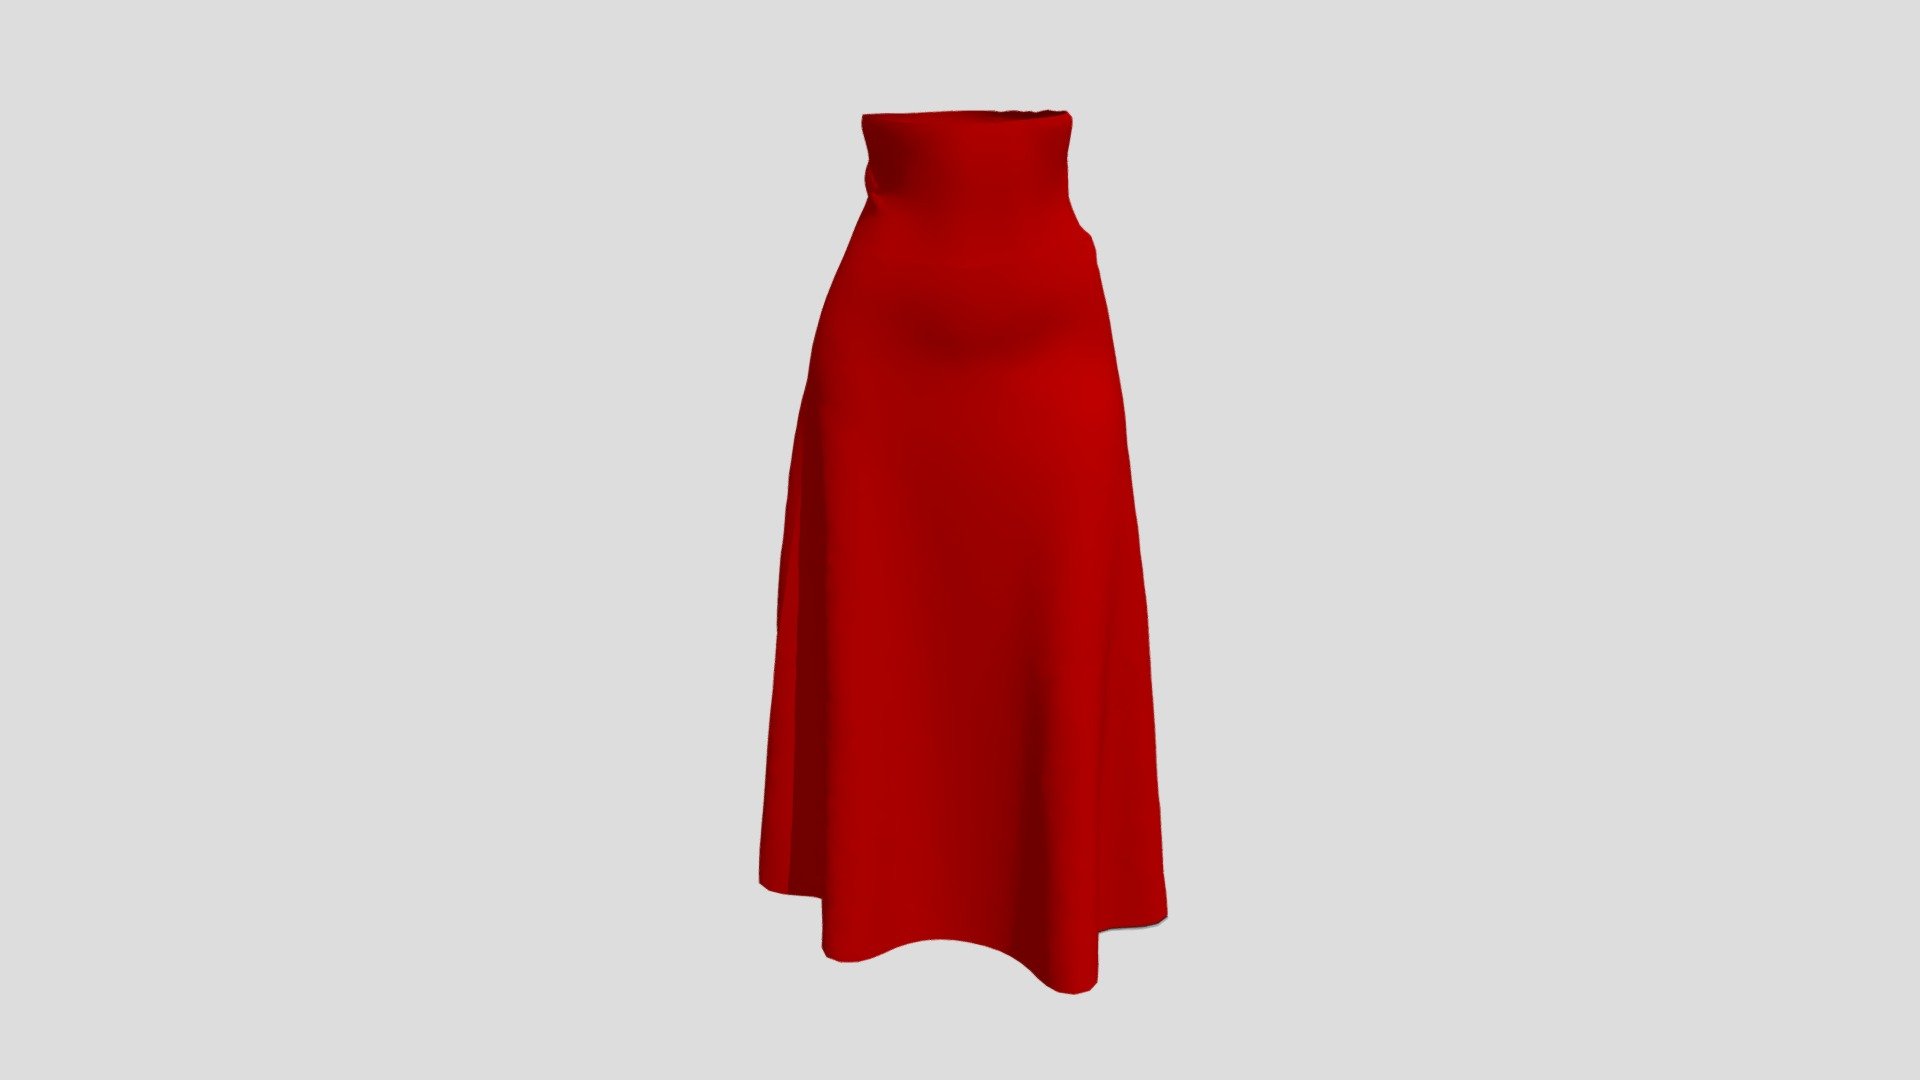 Custom Maxi Skirt 3D Model
Perfect for companies that want to present mockups professionally or use for our 3D Kit builder application. 
Contact us if you have any custom 3D model request for apparel.

Find out more: Custom Uniform Builder - Custom Maxi Skirt | Maxi Skirt 3D Model - Download Free 3D model by Uniform Builder (@uniformbuilder) 3d model